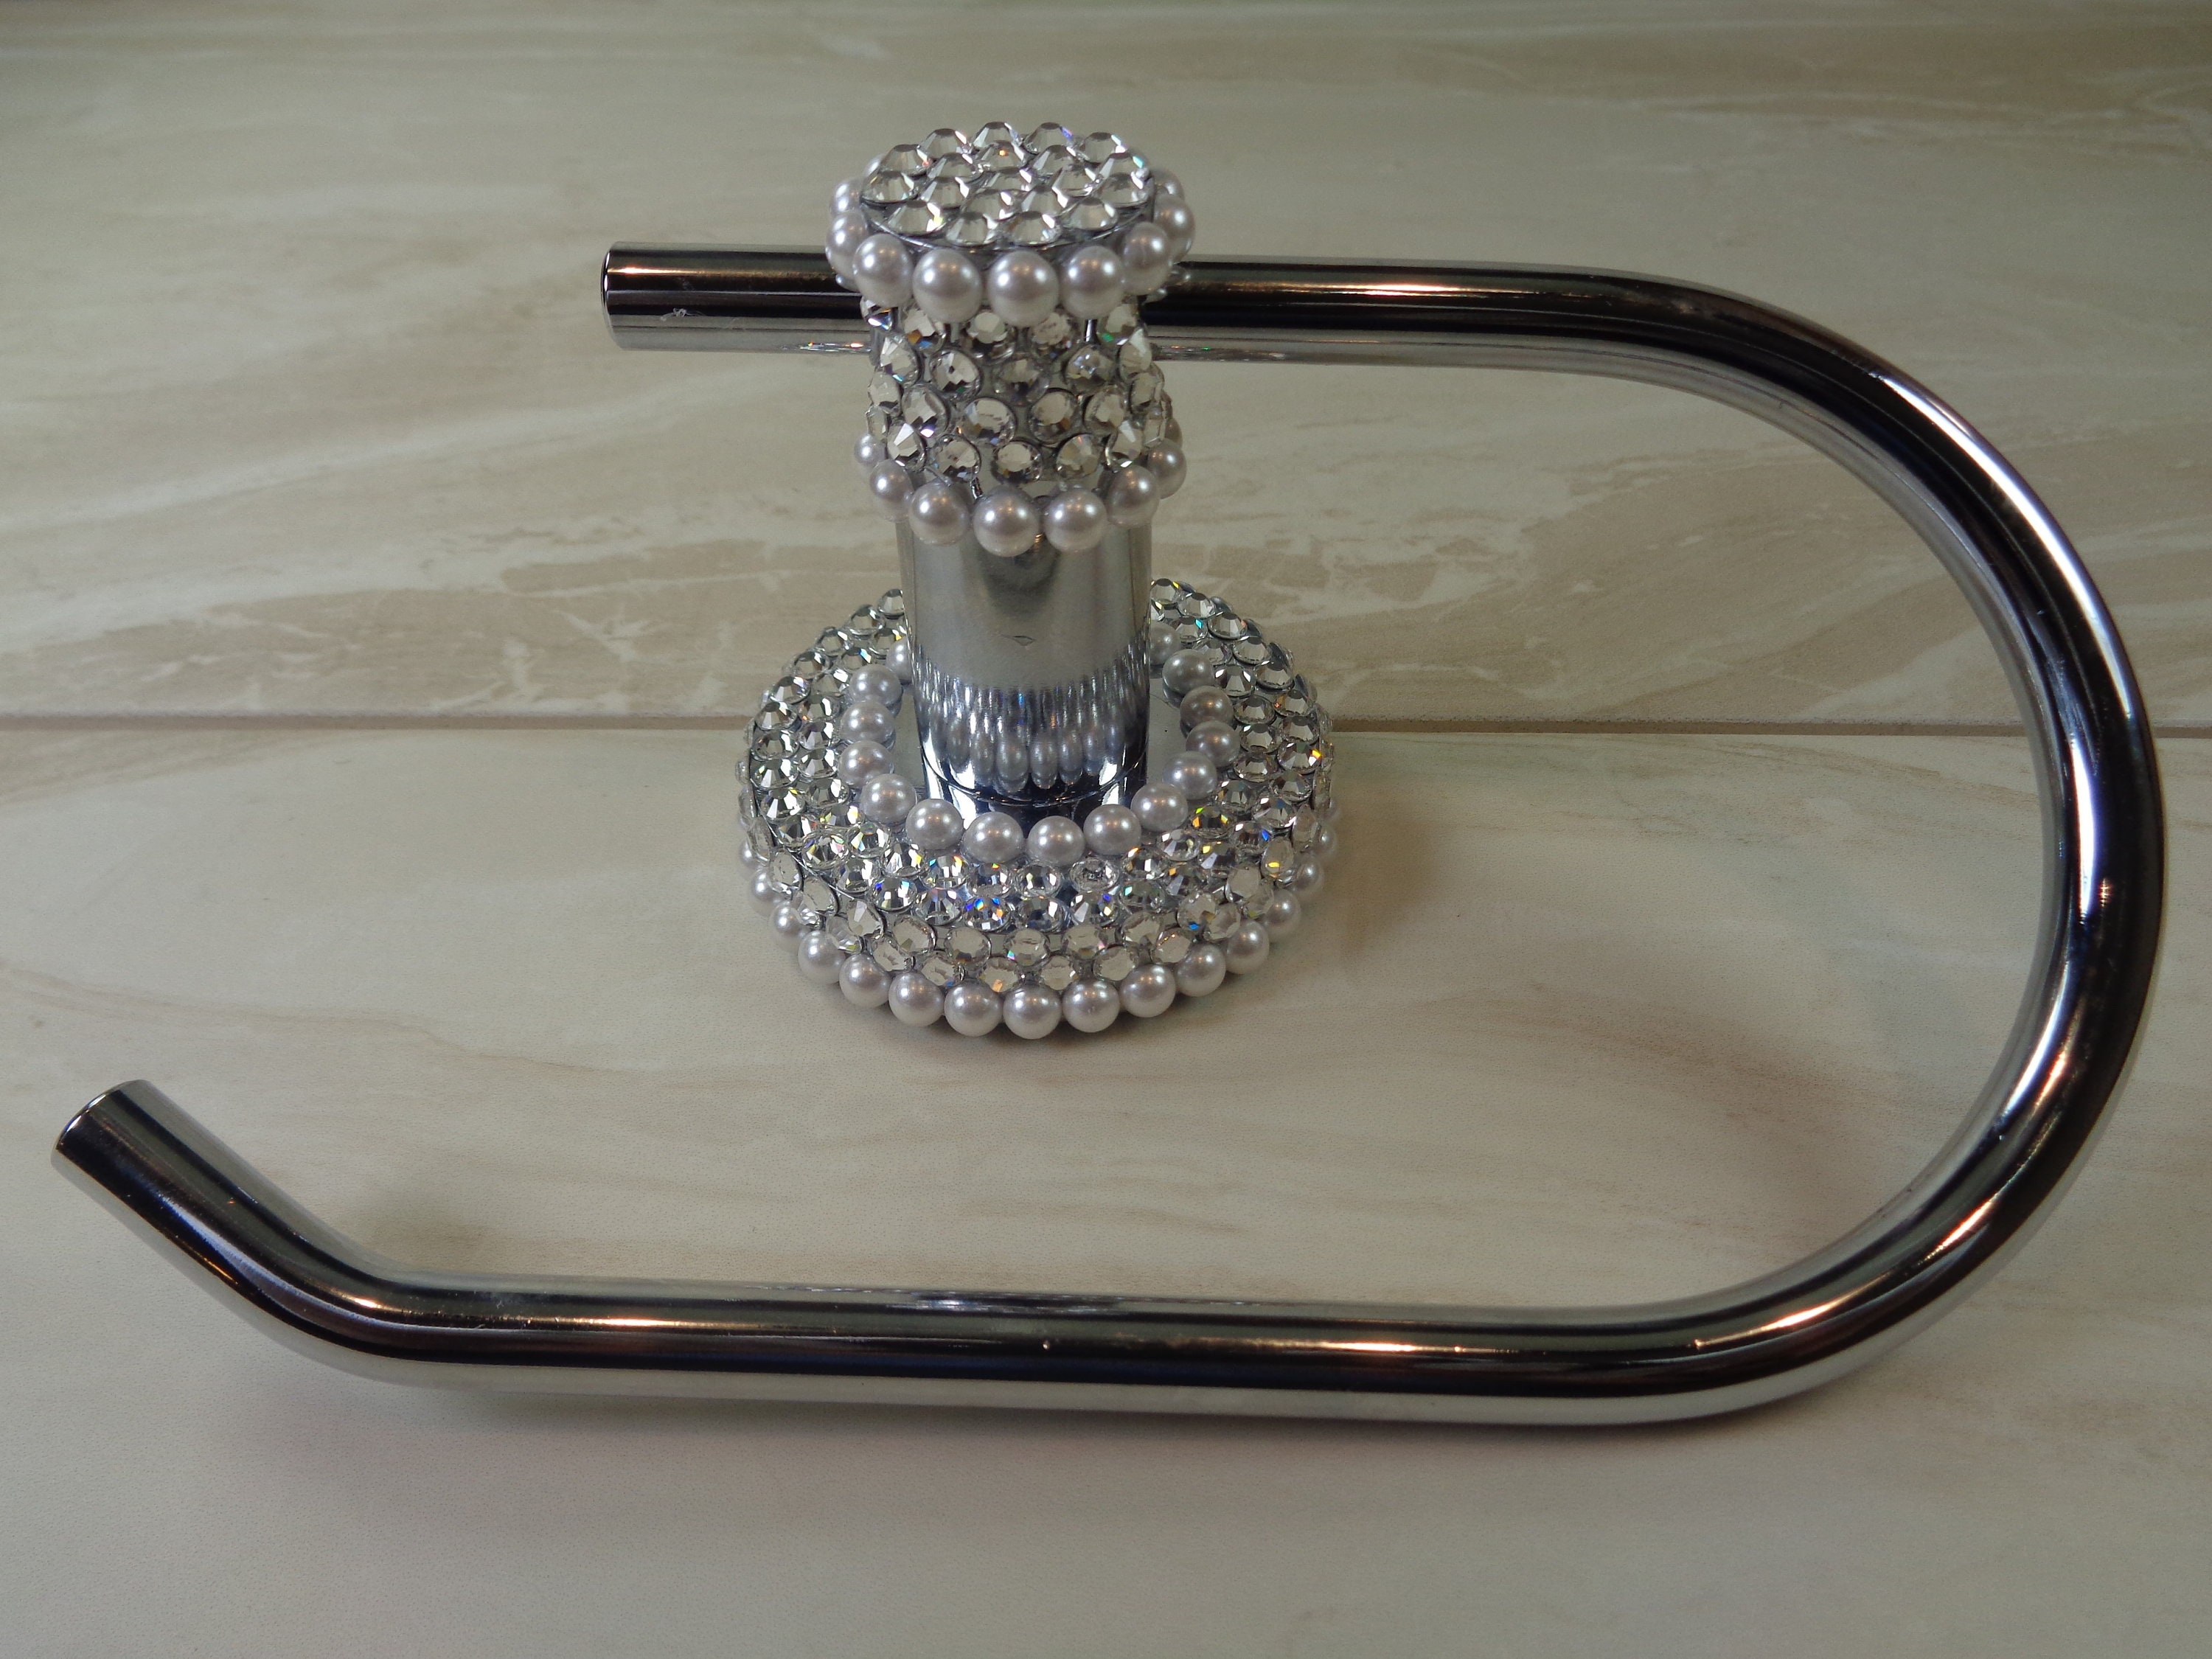 New Sparkling Diamante Crystal Toilet Roll Storage Holder Stand Chrome Bling 